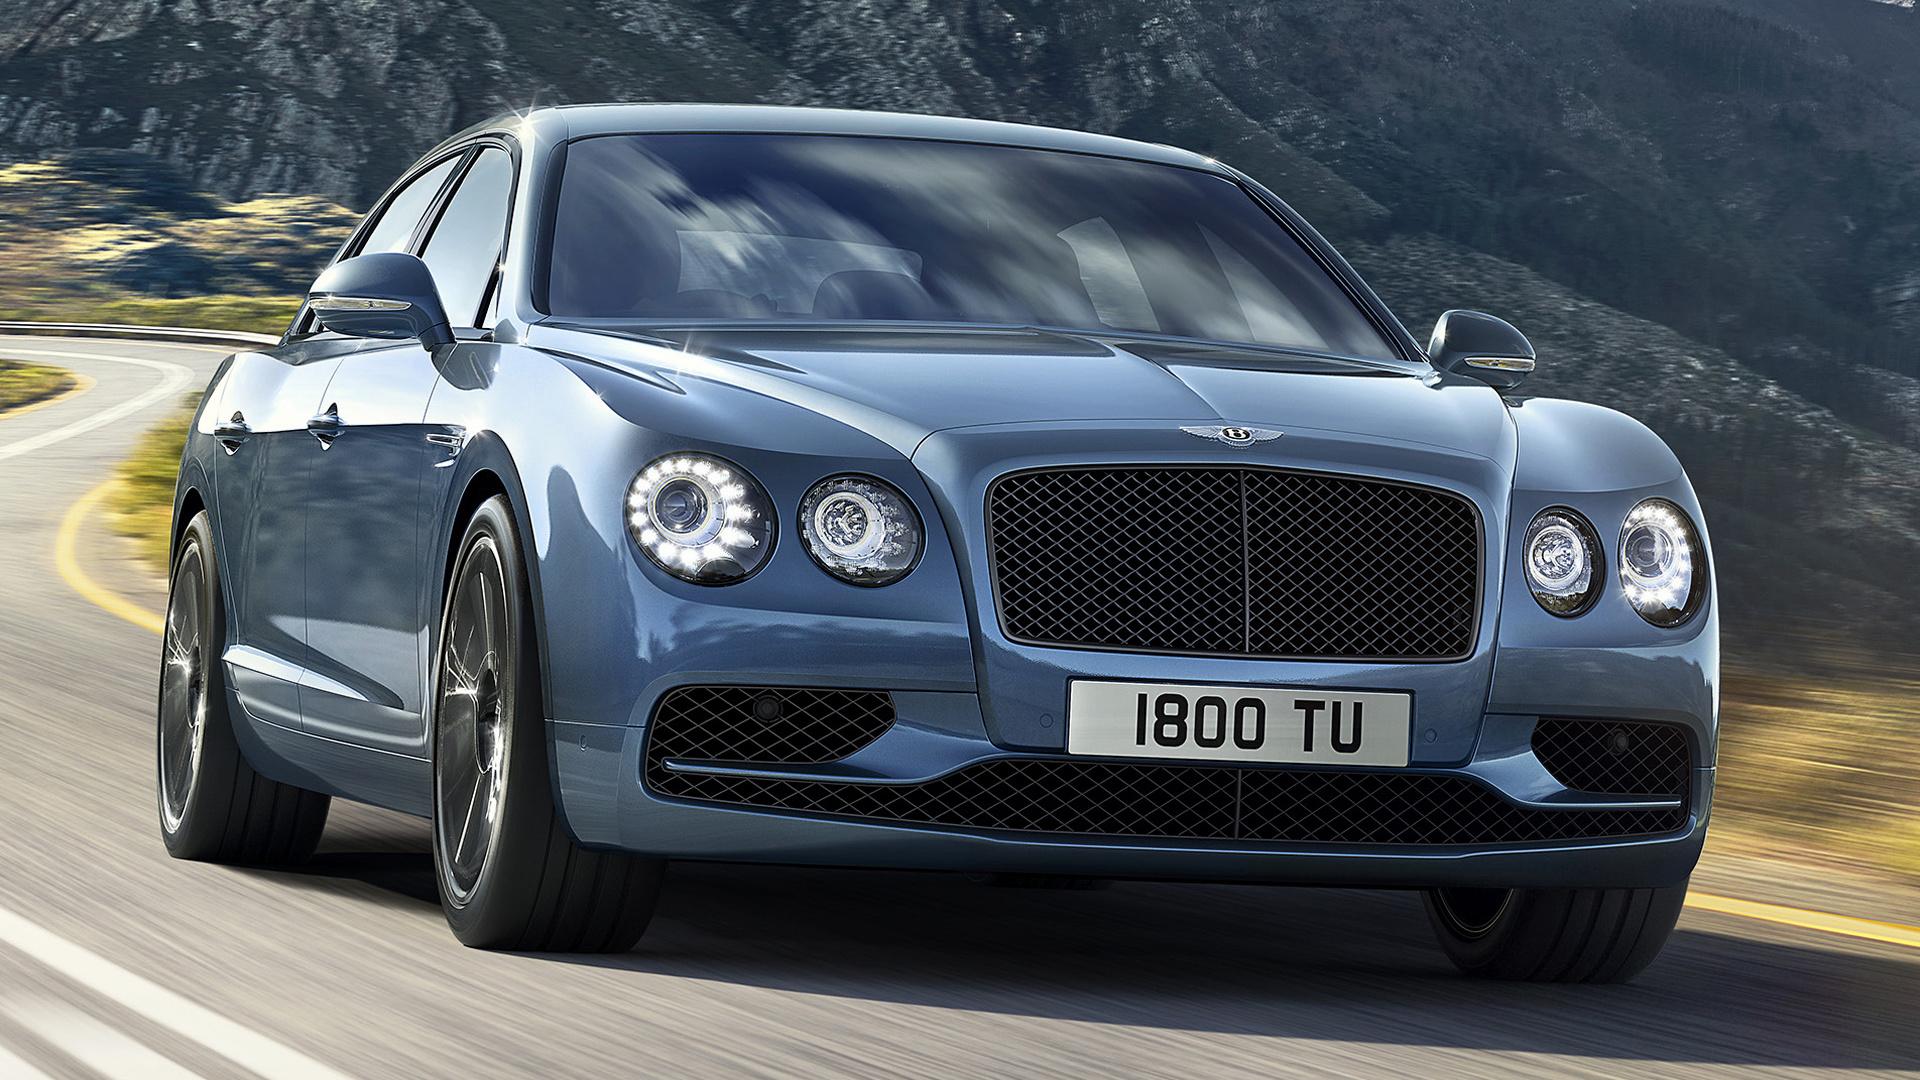 Bentley Flying Spur W12 S (UK) and HD Image. Car